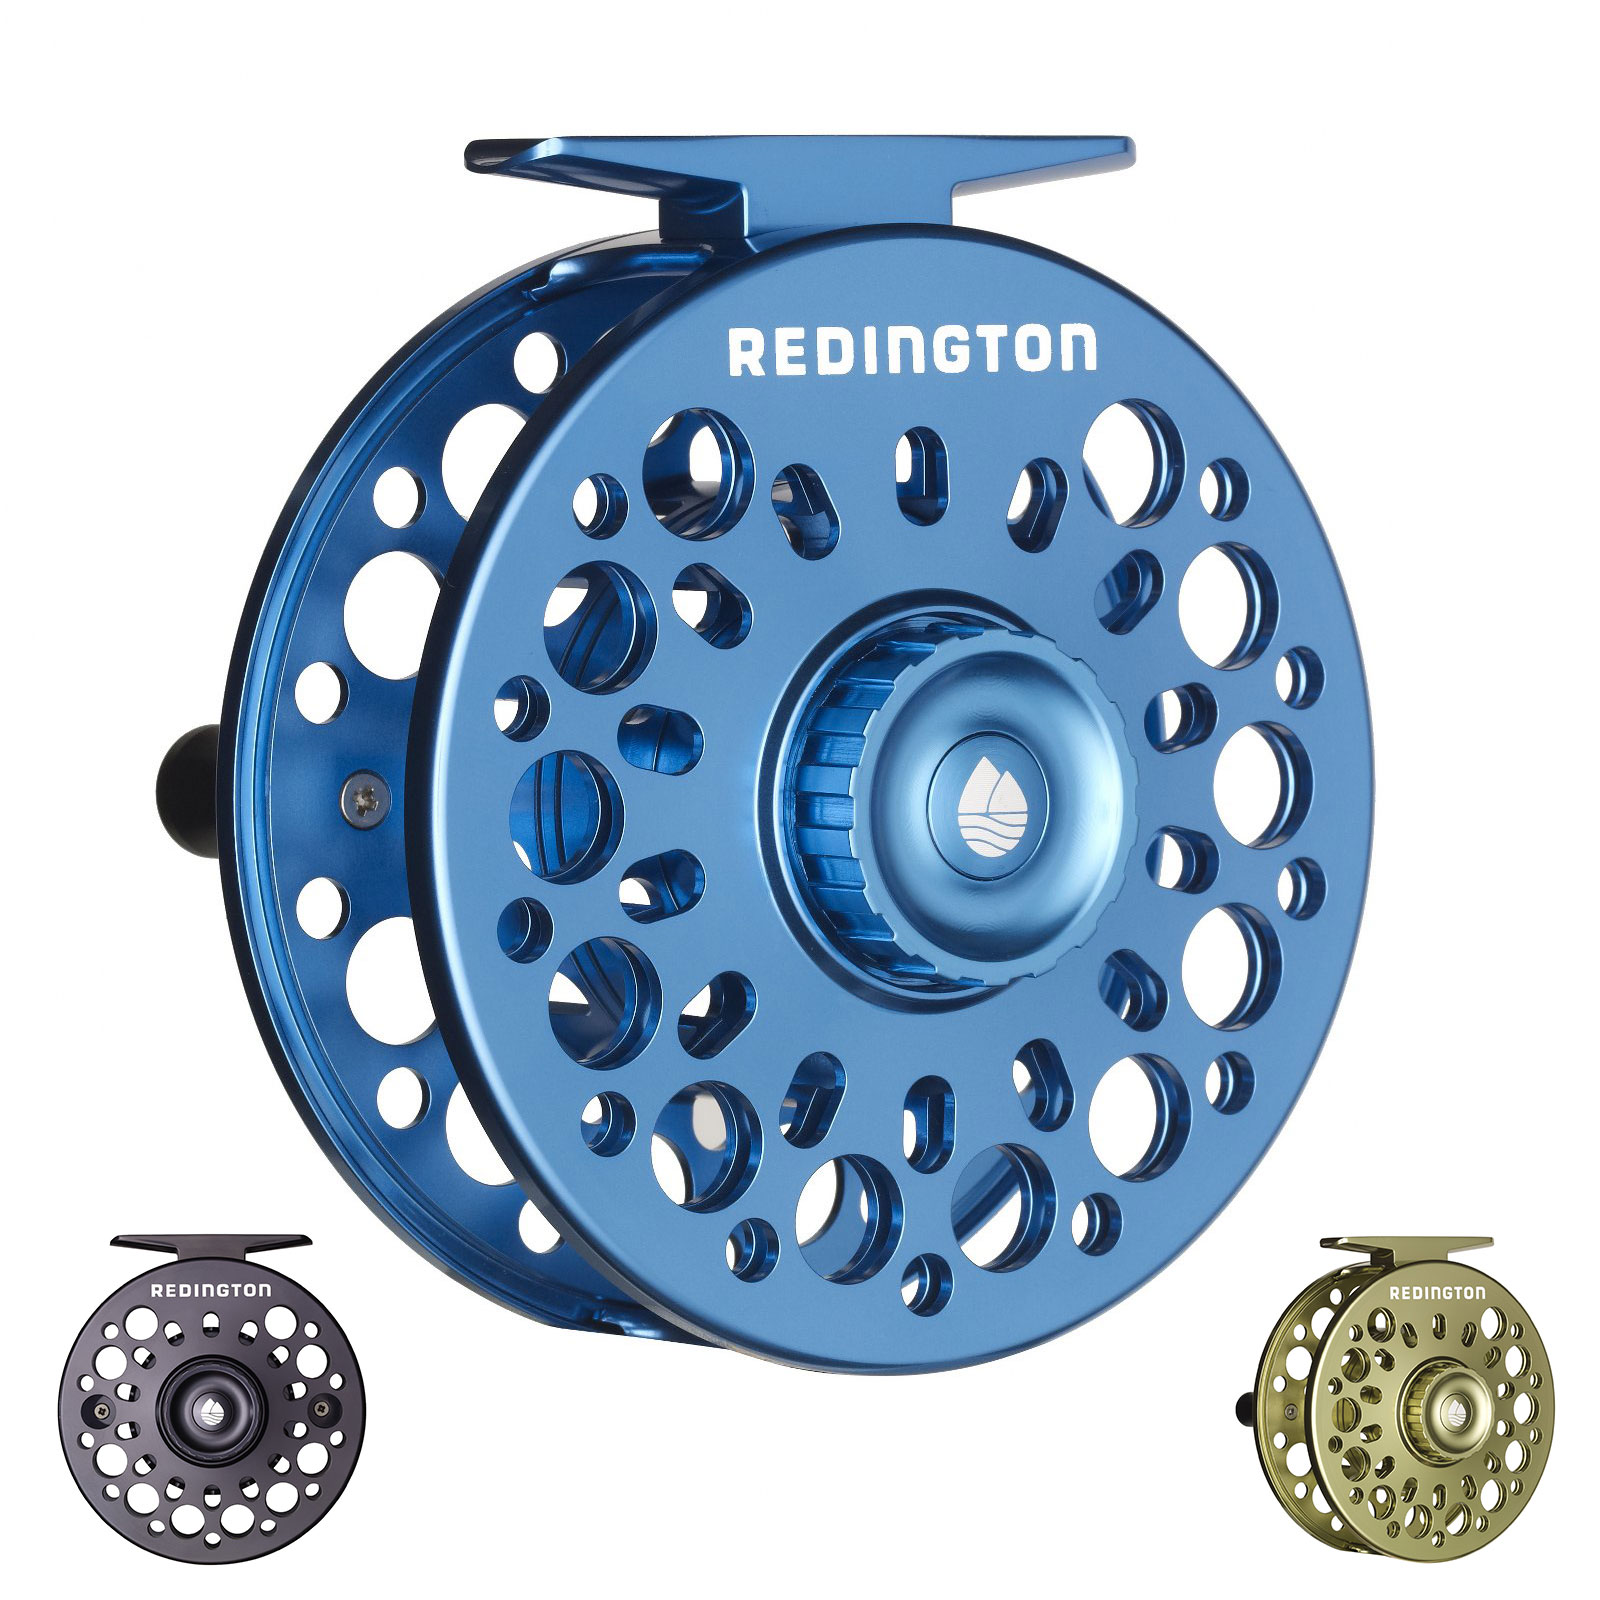 REDINGTON RED FLY 2 Fishing Fly Reel $8.50 - PicClick